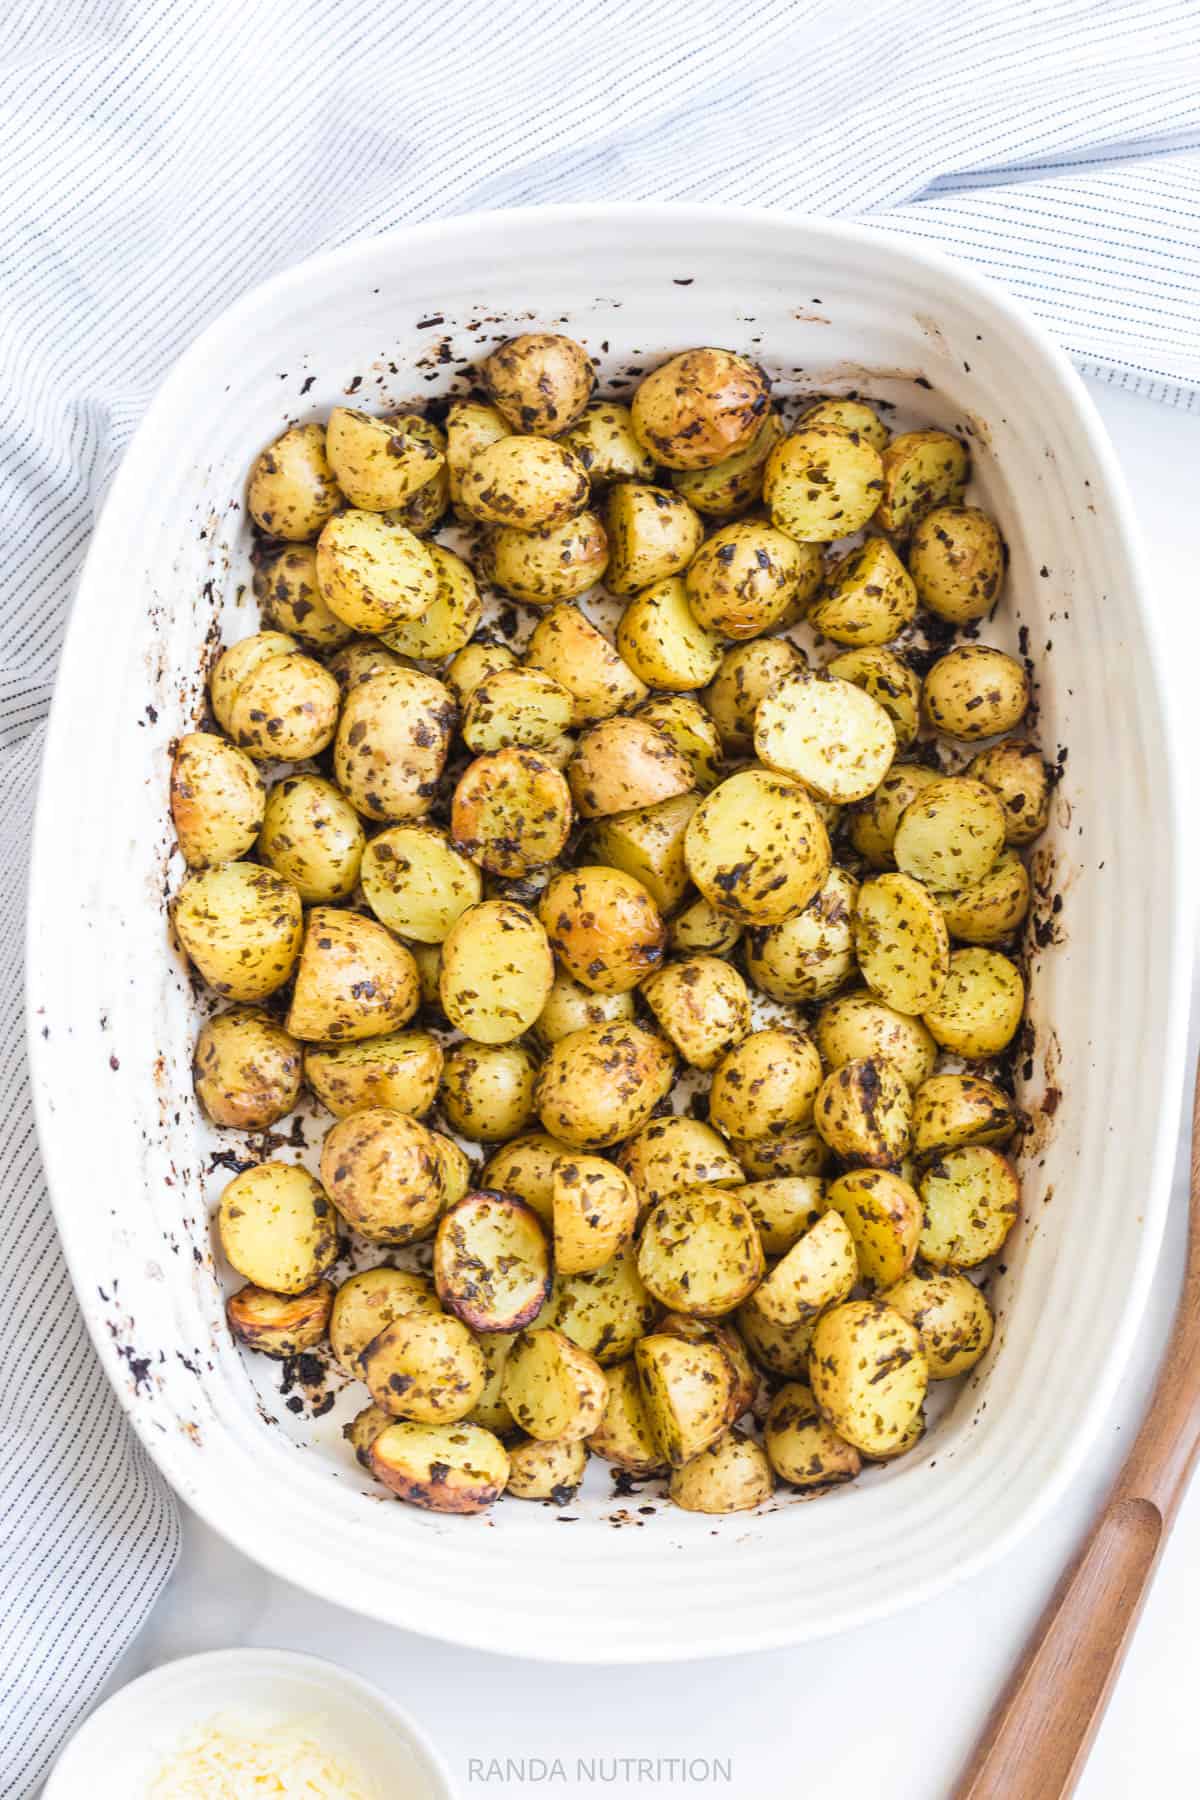 roasted pesto potatoes with only two ingredients: jarred pesto and baby potatoes